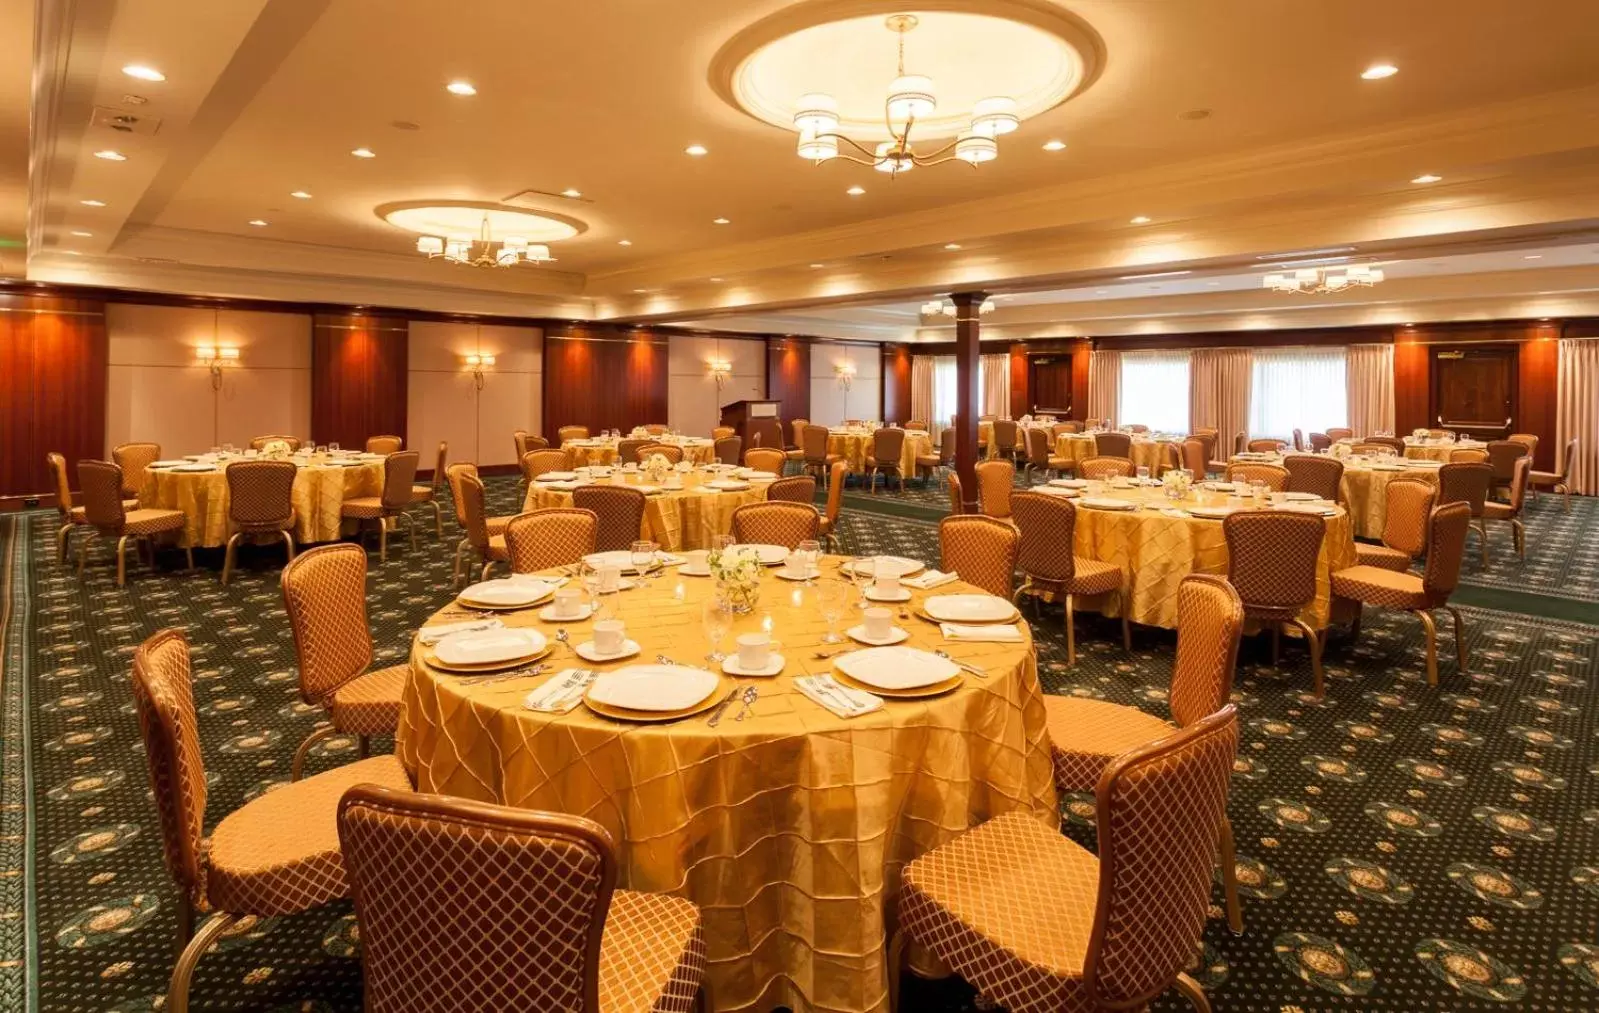 Banquet/Function facilities, Banquet Facilities in Ann Arbor Regent Hotel and Suites